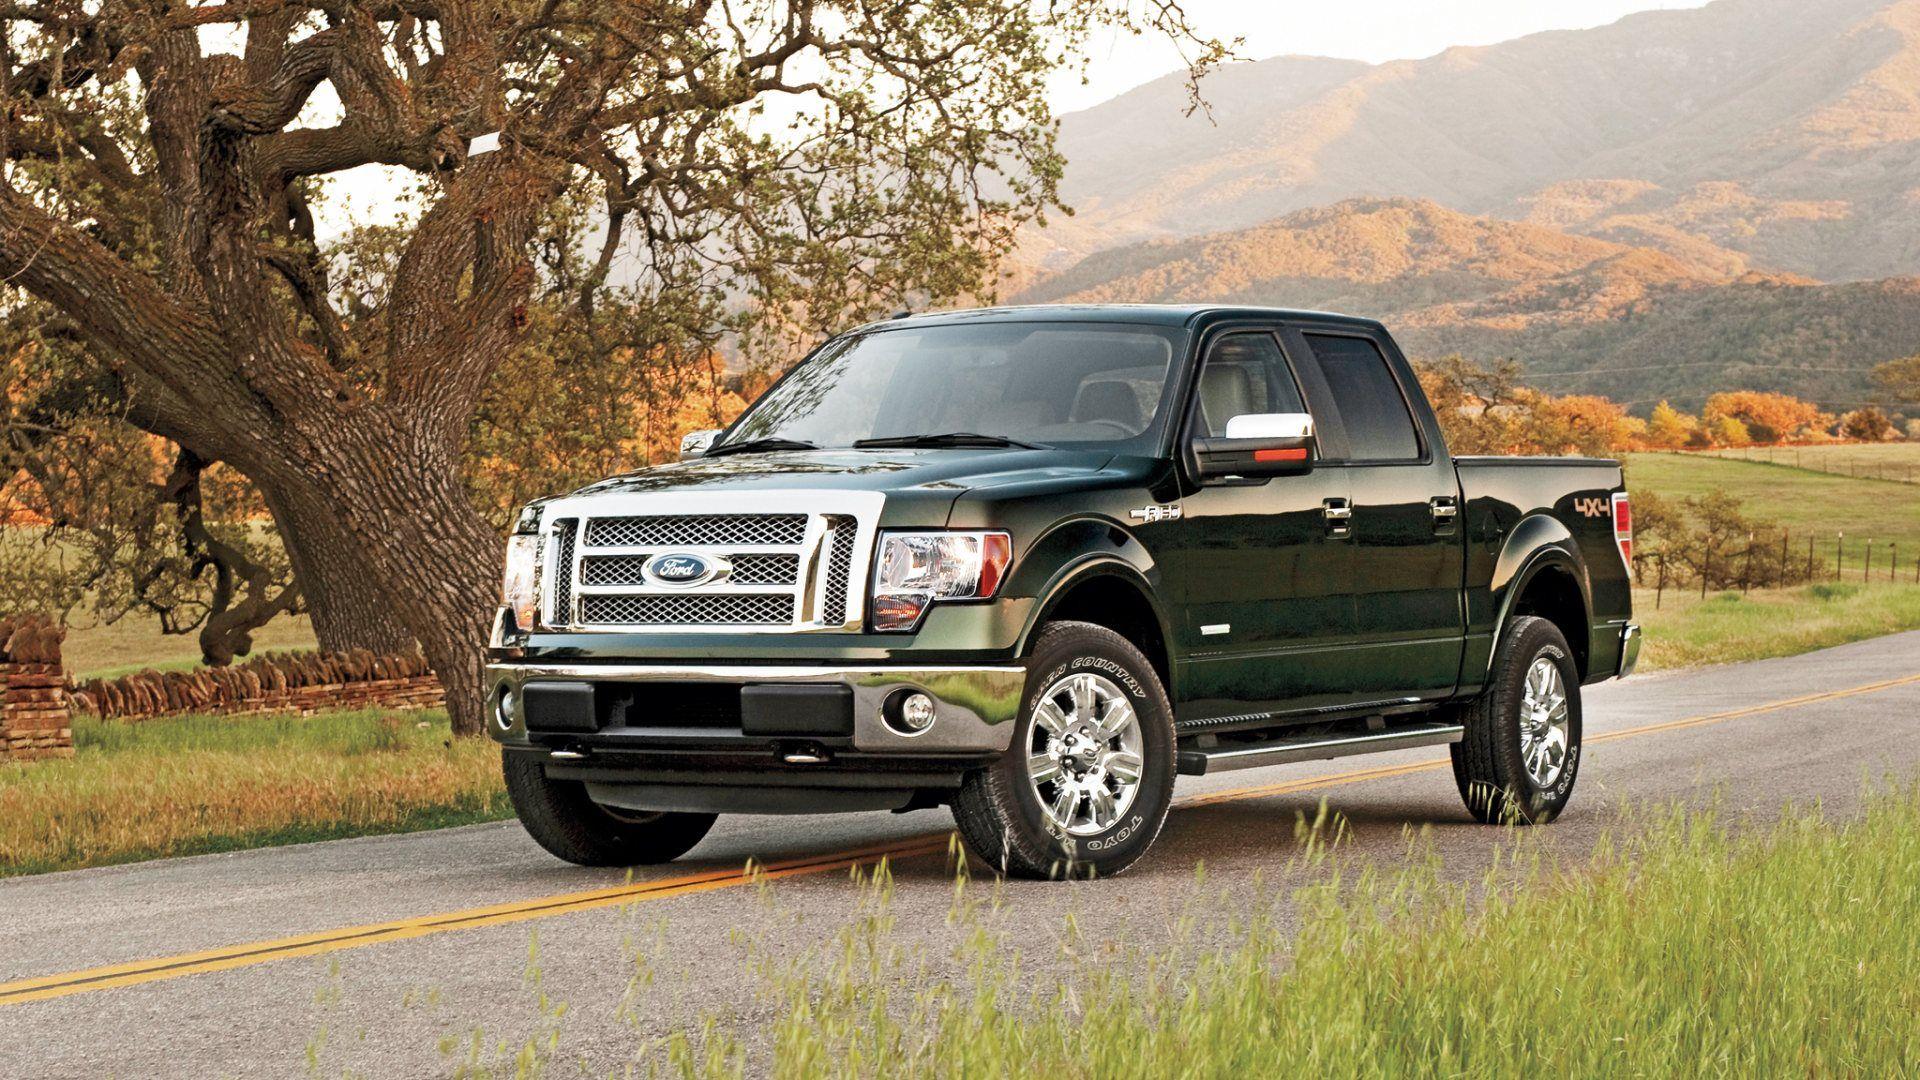 Ford F 150 Wallpaper, Download Ford F 150 HD Wallpaper for Free